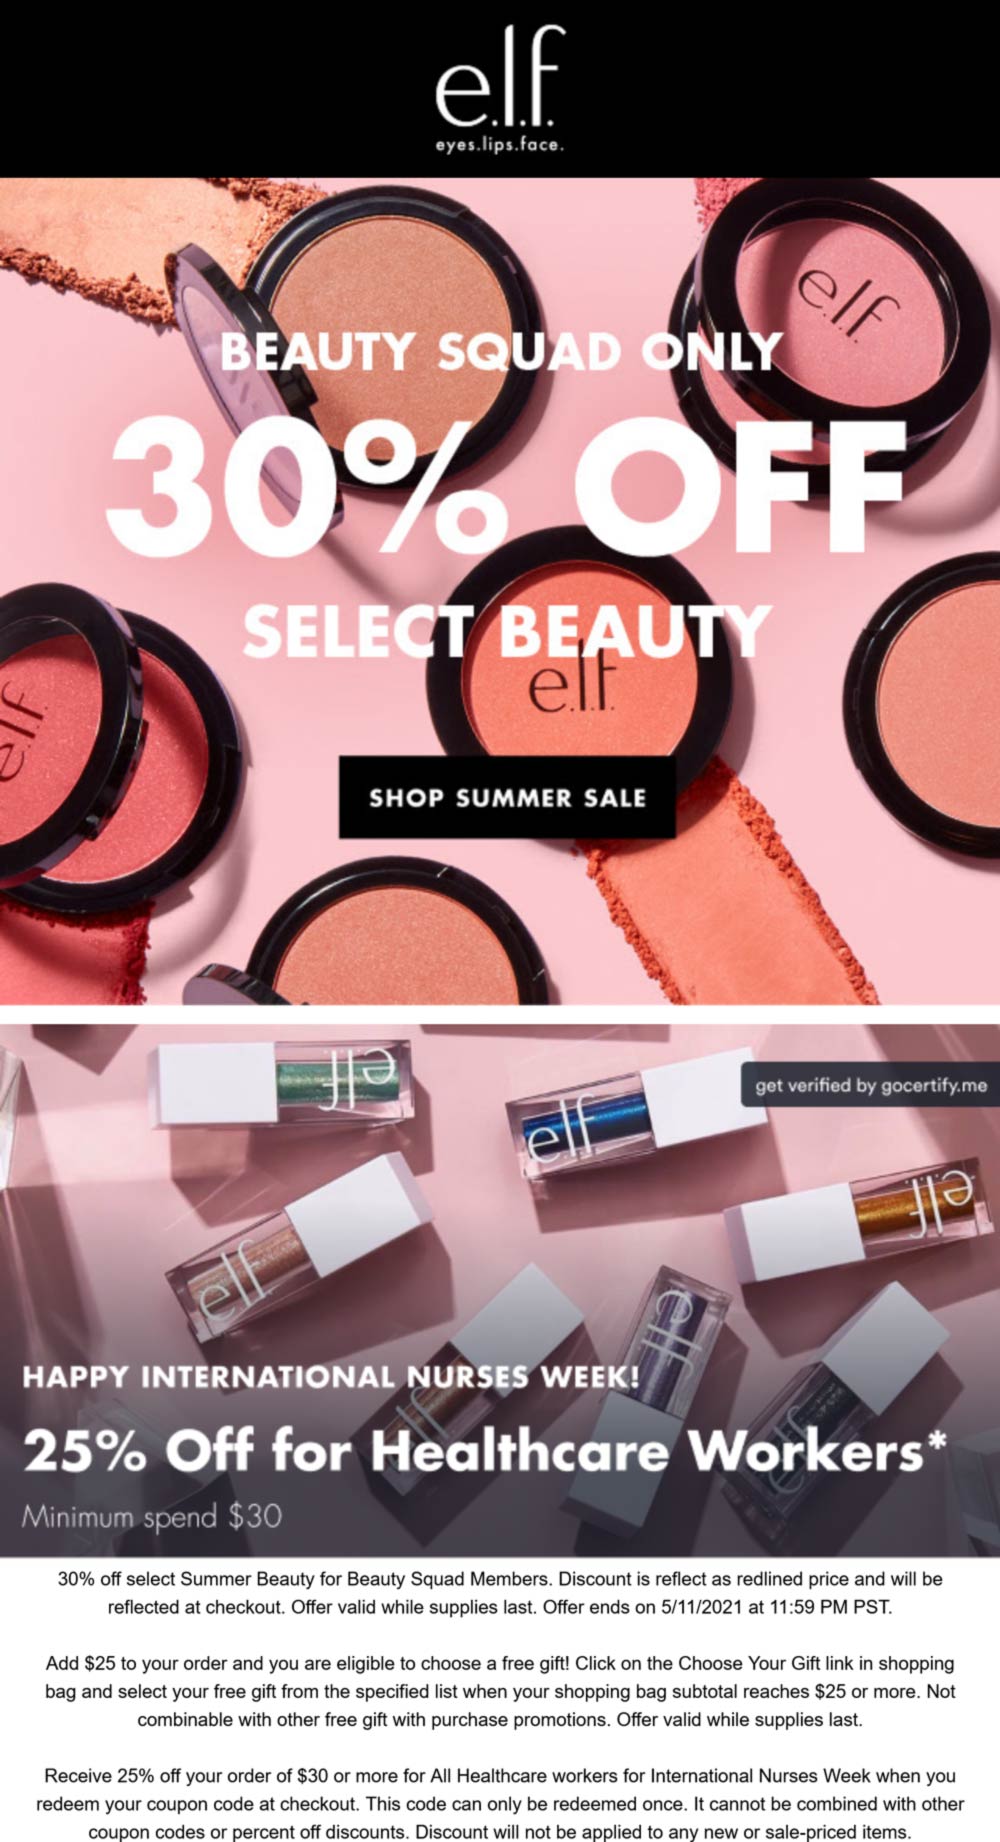 e.l.f. Cosmetics stores Coupon  30% off online today at e.l.f. Cosmetics #elfcosmetics 